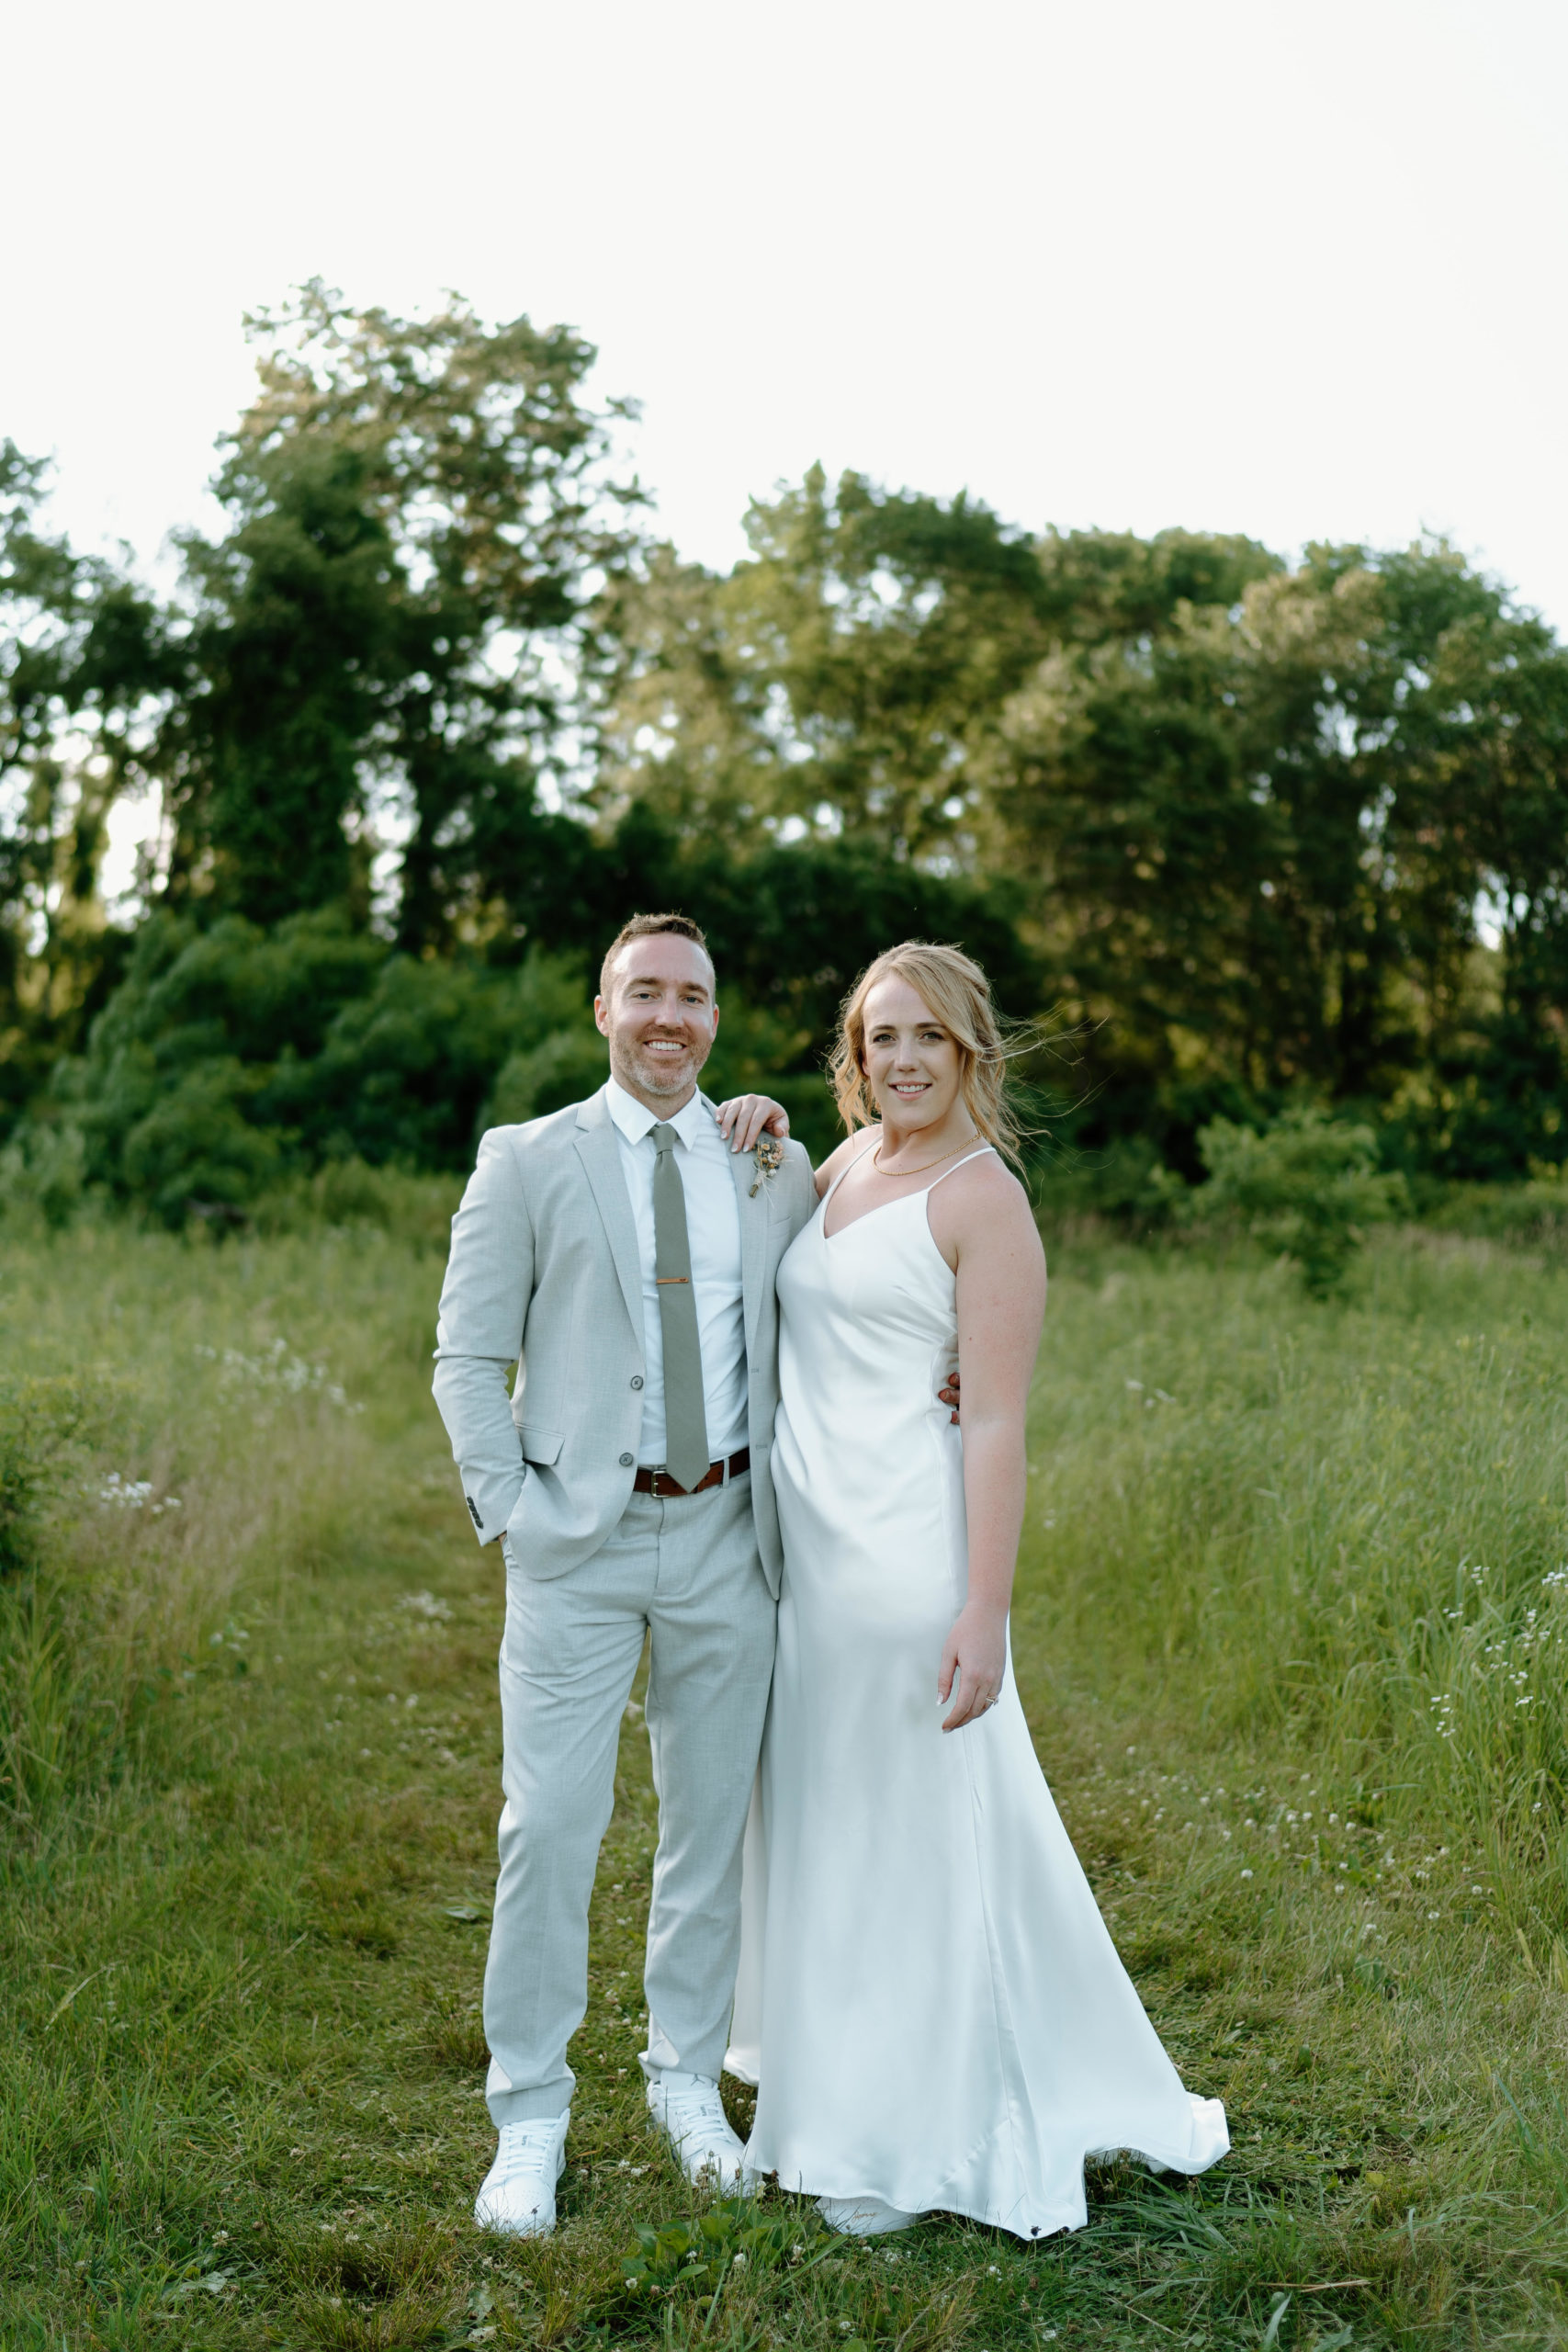 This is a bride and groom taking portraits on their wedding day at Indian Creek Nature Center in Cedar Rapids, IA